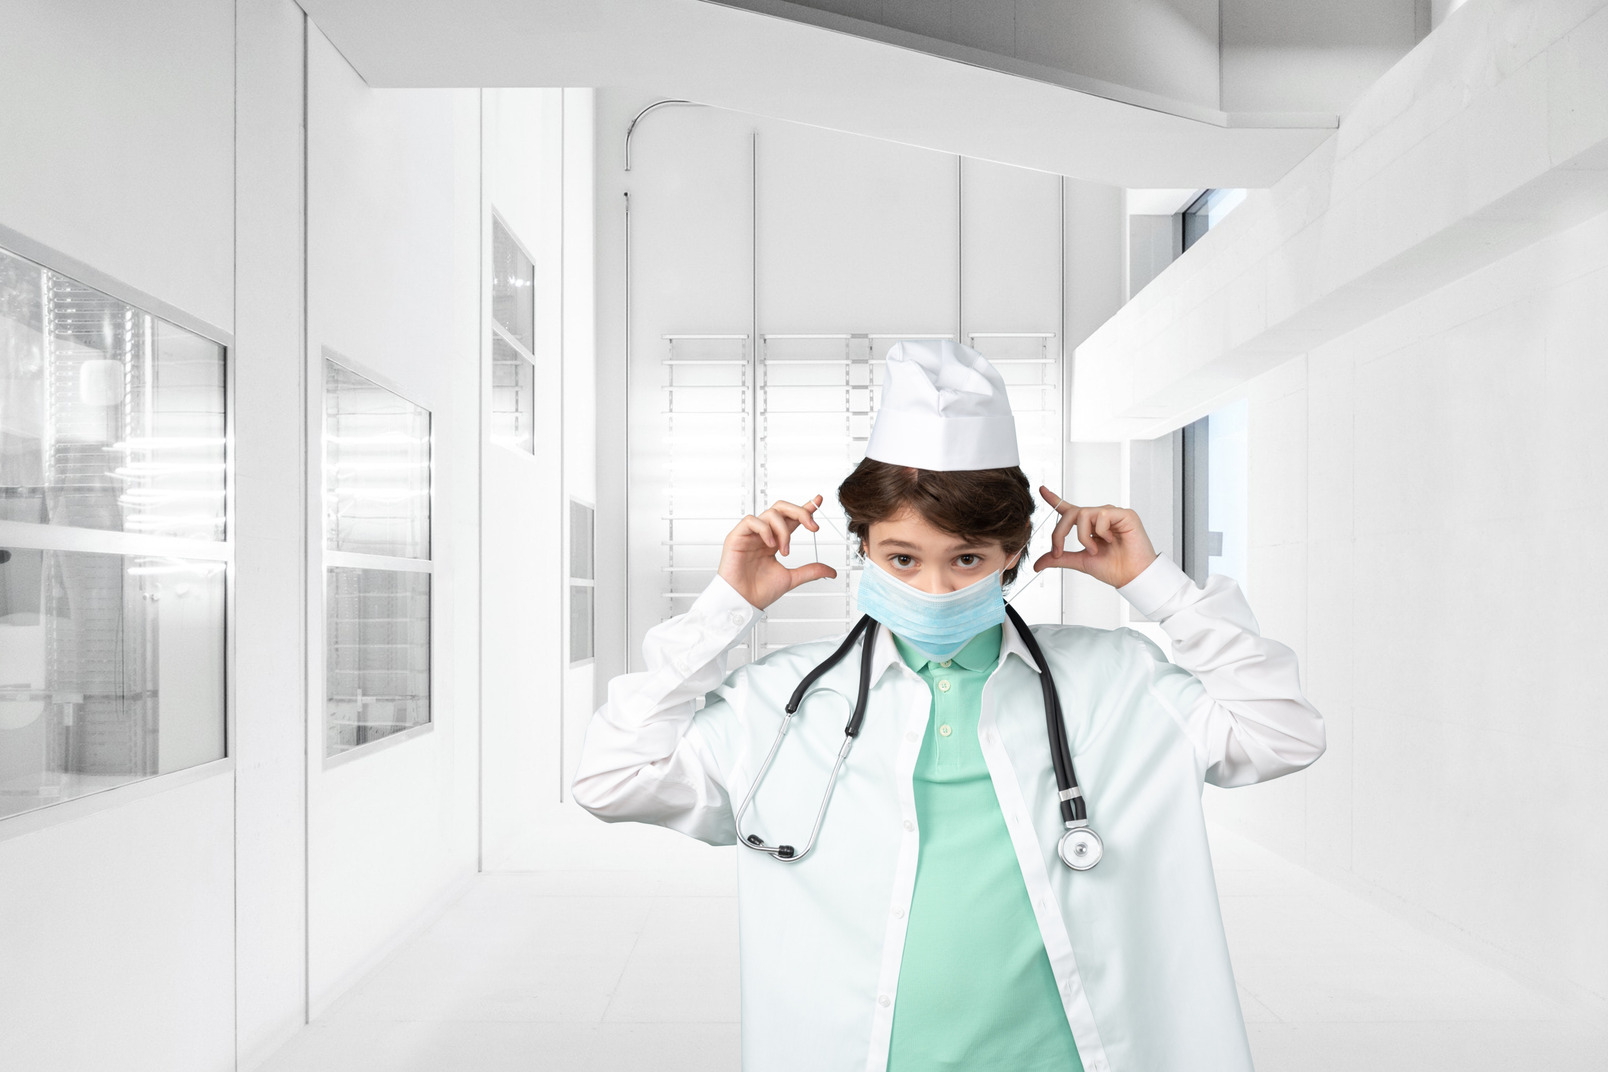 Portrait of a female doctor in white lab coat and stethoscope